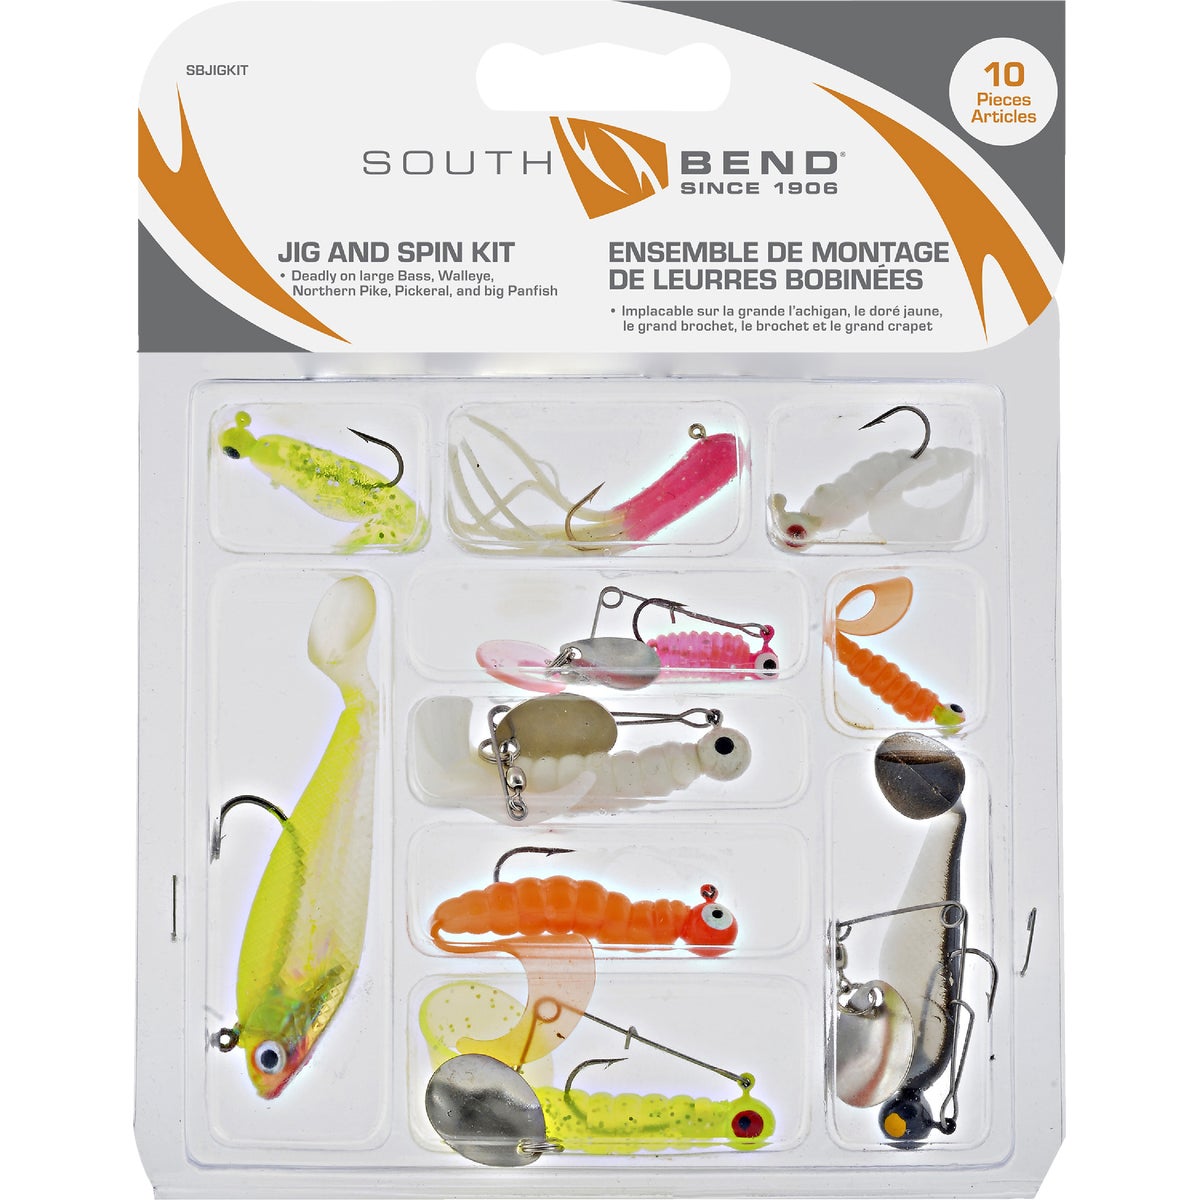 Item 833487, Kit consists of 10 assorted spin jigs, grub jigs, and shad jigs in popular 